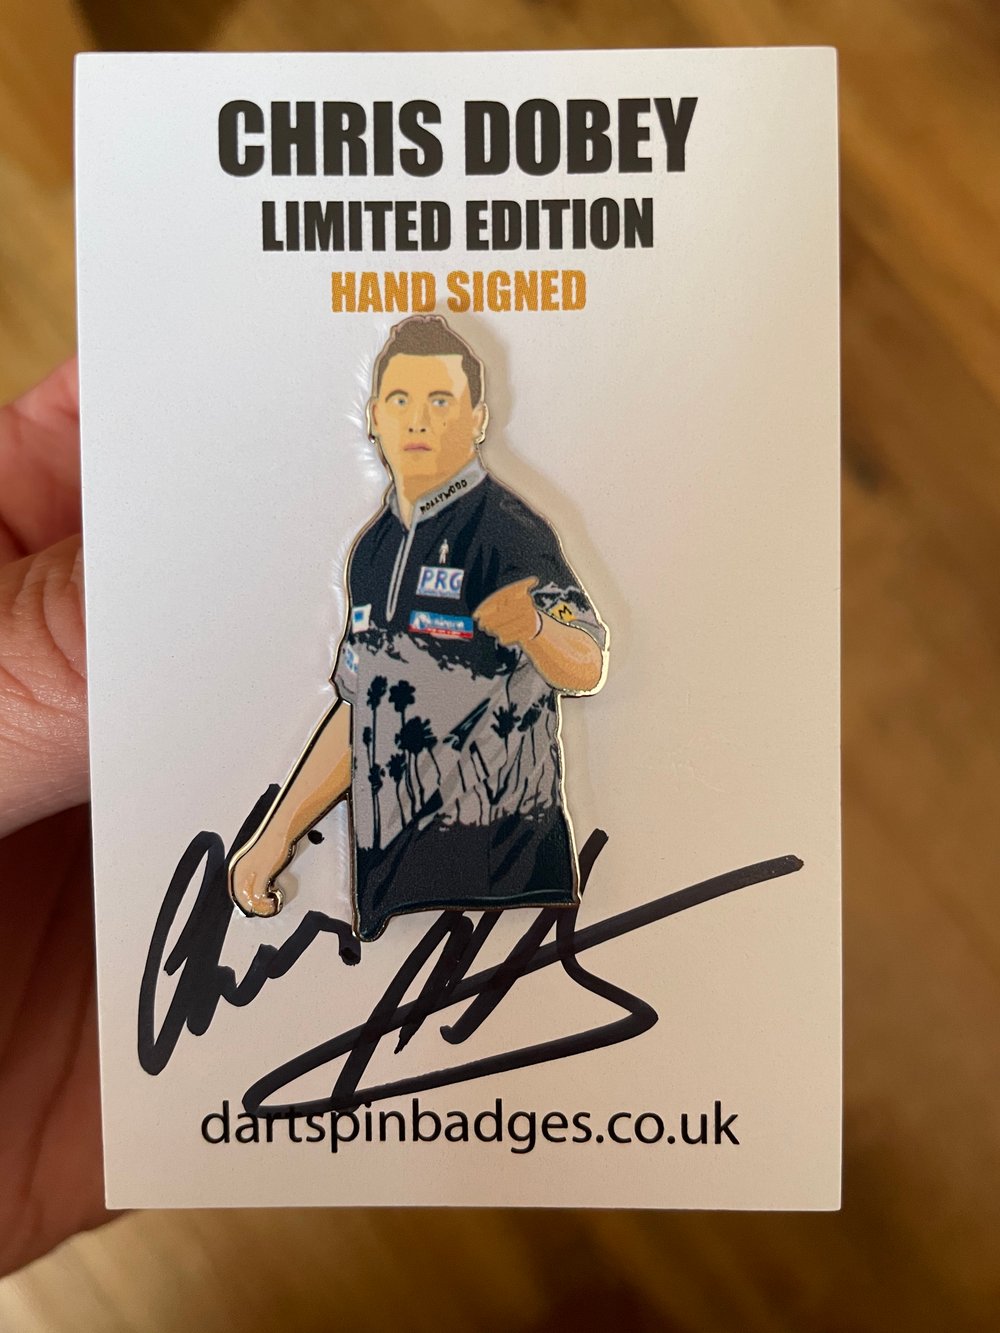 CHRIS DOBEY LIMITED EDITION PIN BADGE HAND SIGNED